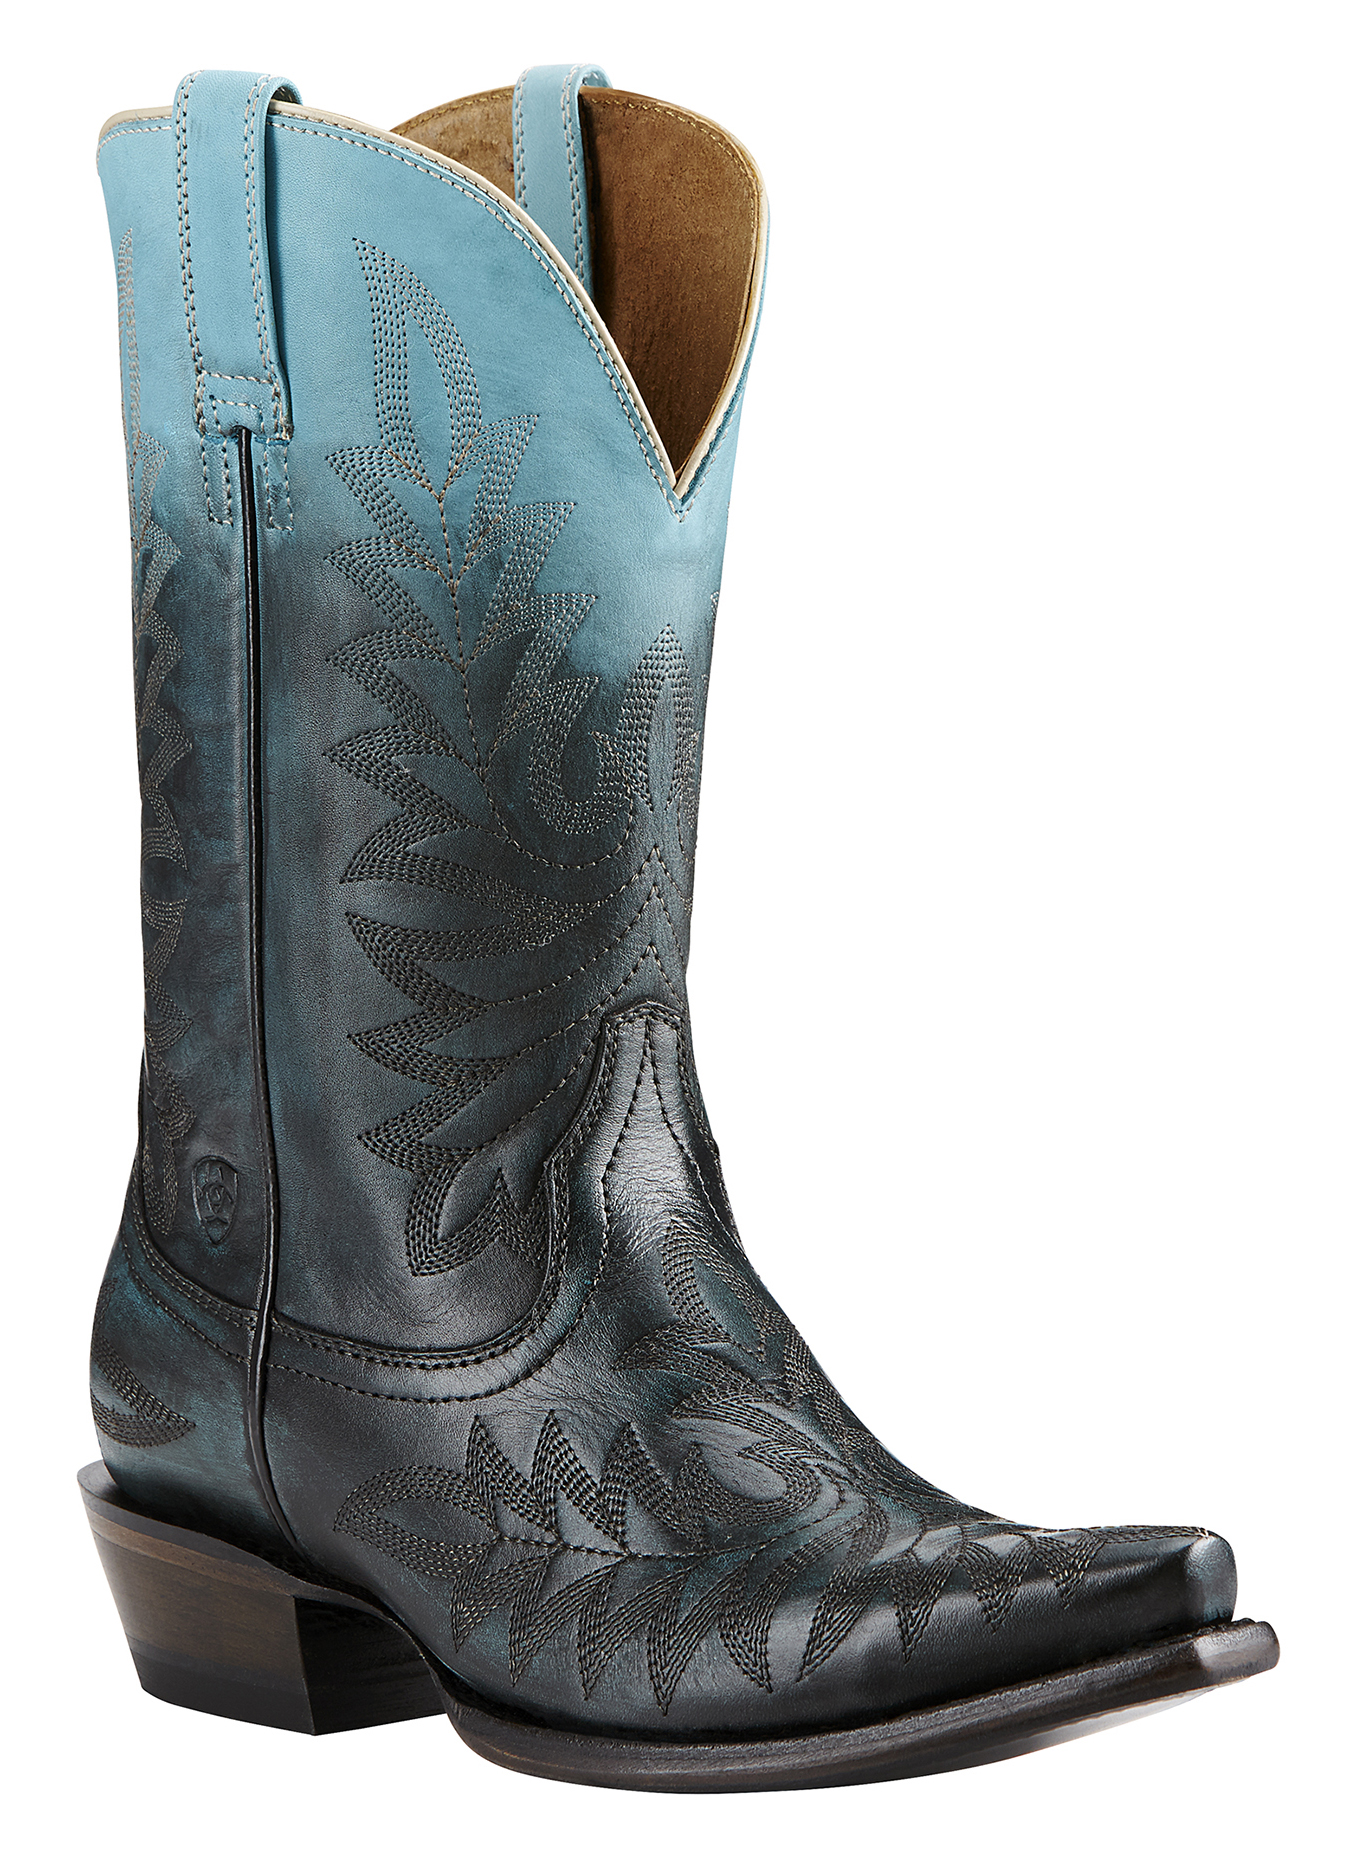 Ariat Blue Ombre Cowgirl Boots - Snip Toe - Country Outfitter